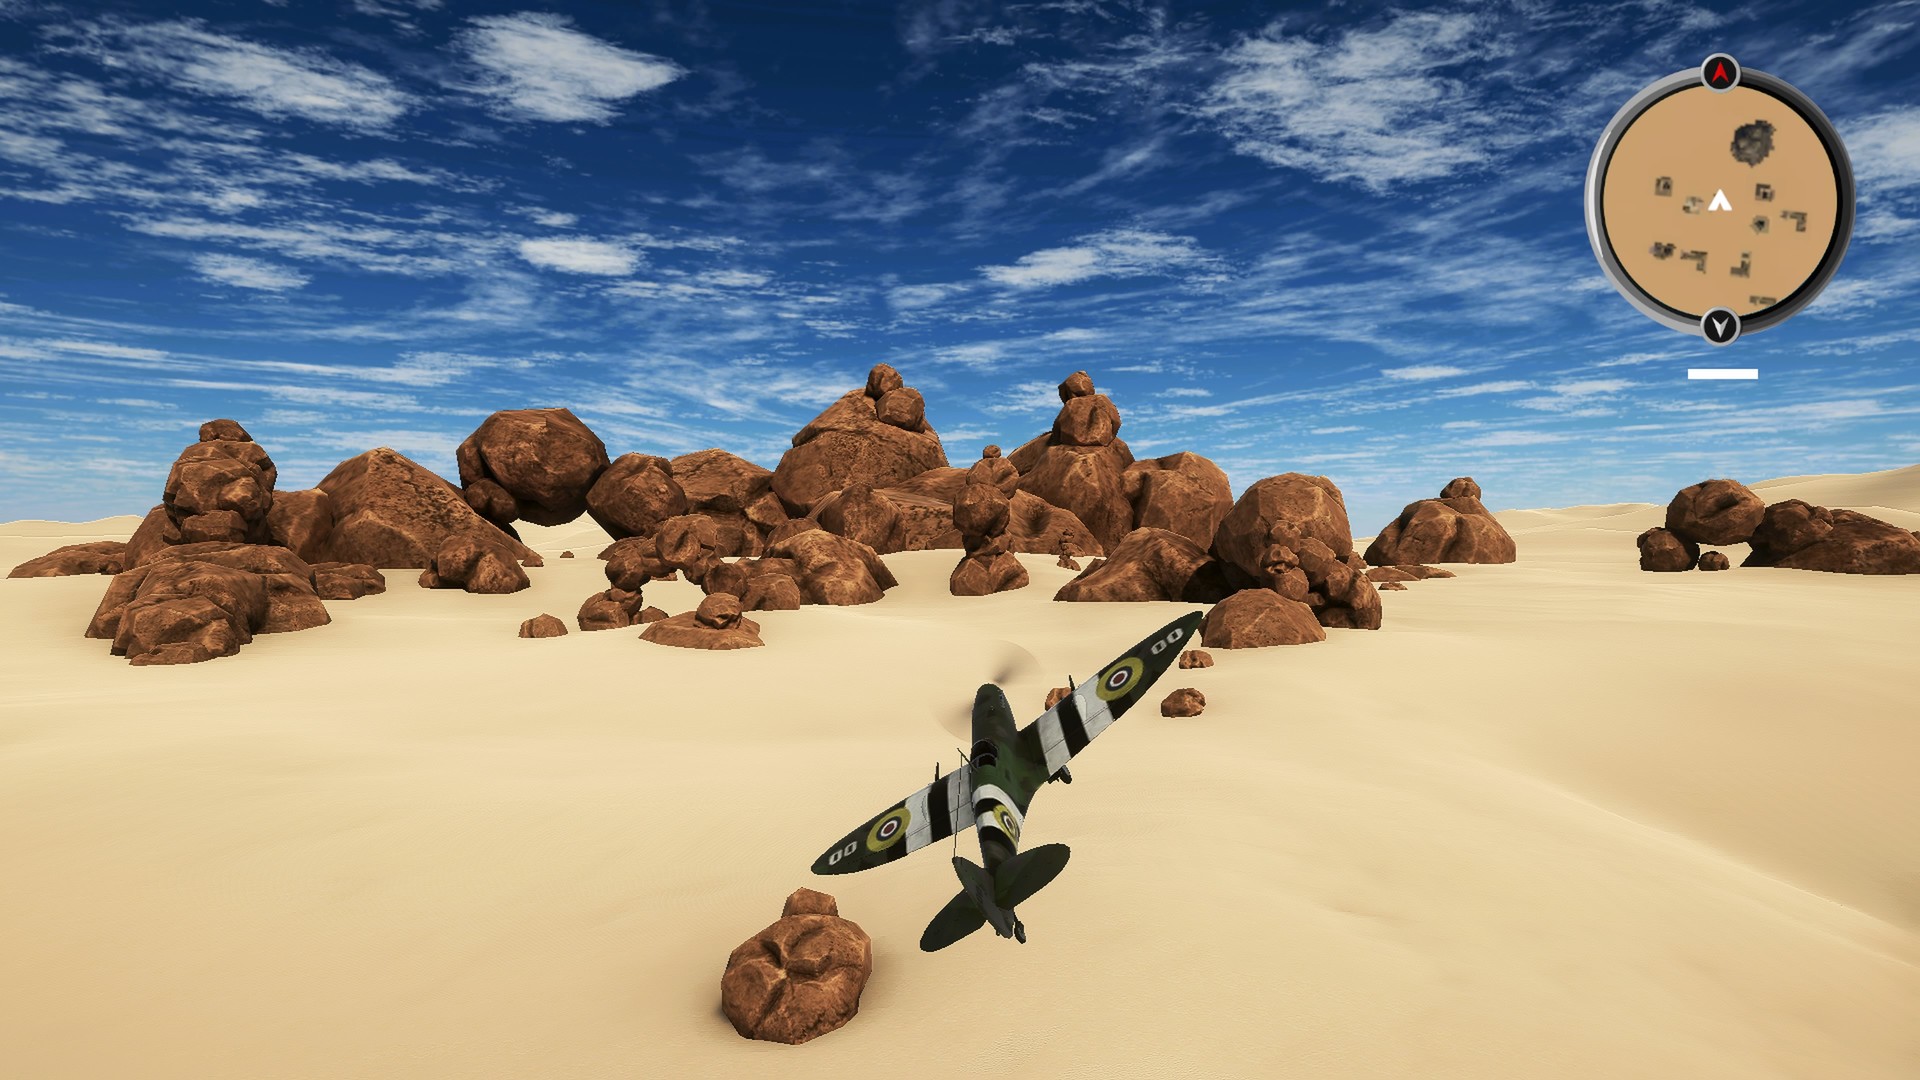 A green plane flying in the desert in RA Airplane Challenge